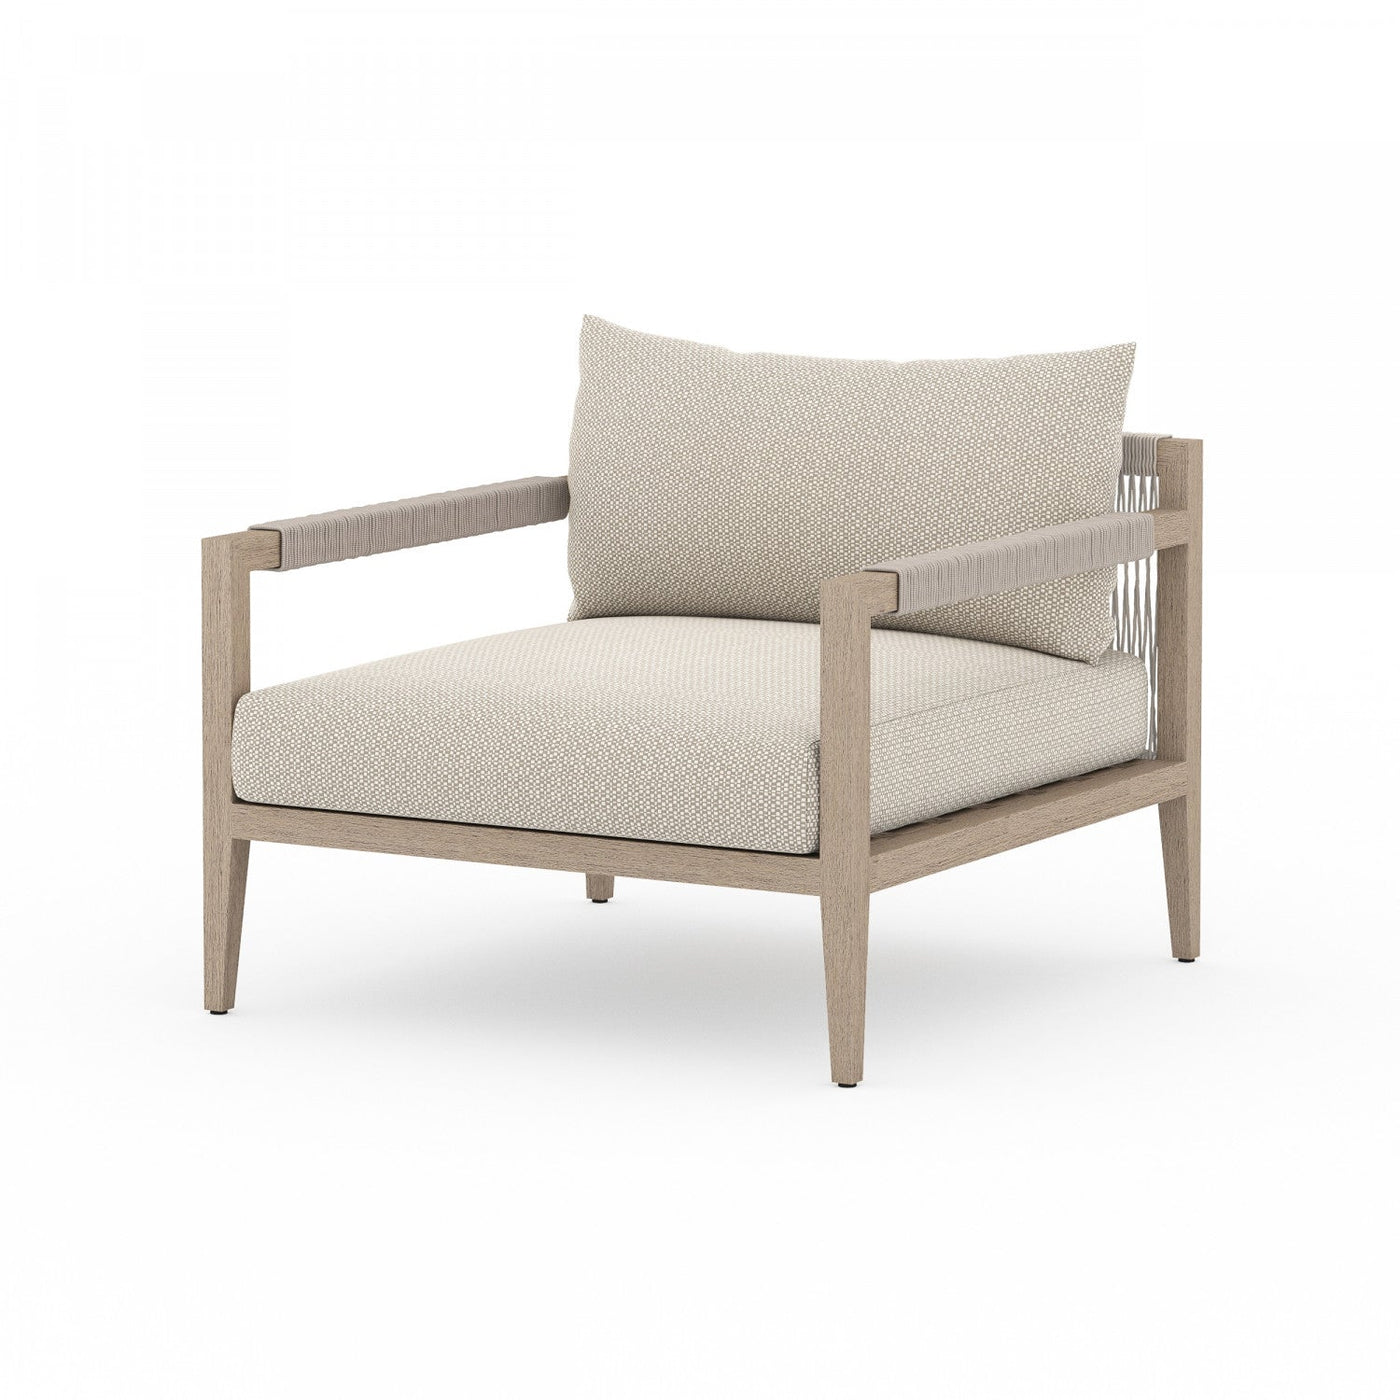 SHERWOOD OUTDOOR CHAIR, WASHED BROWN